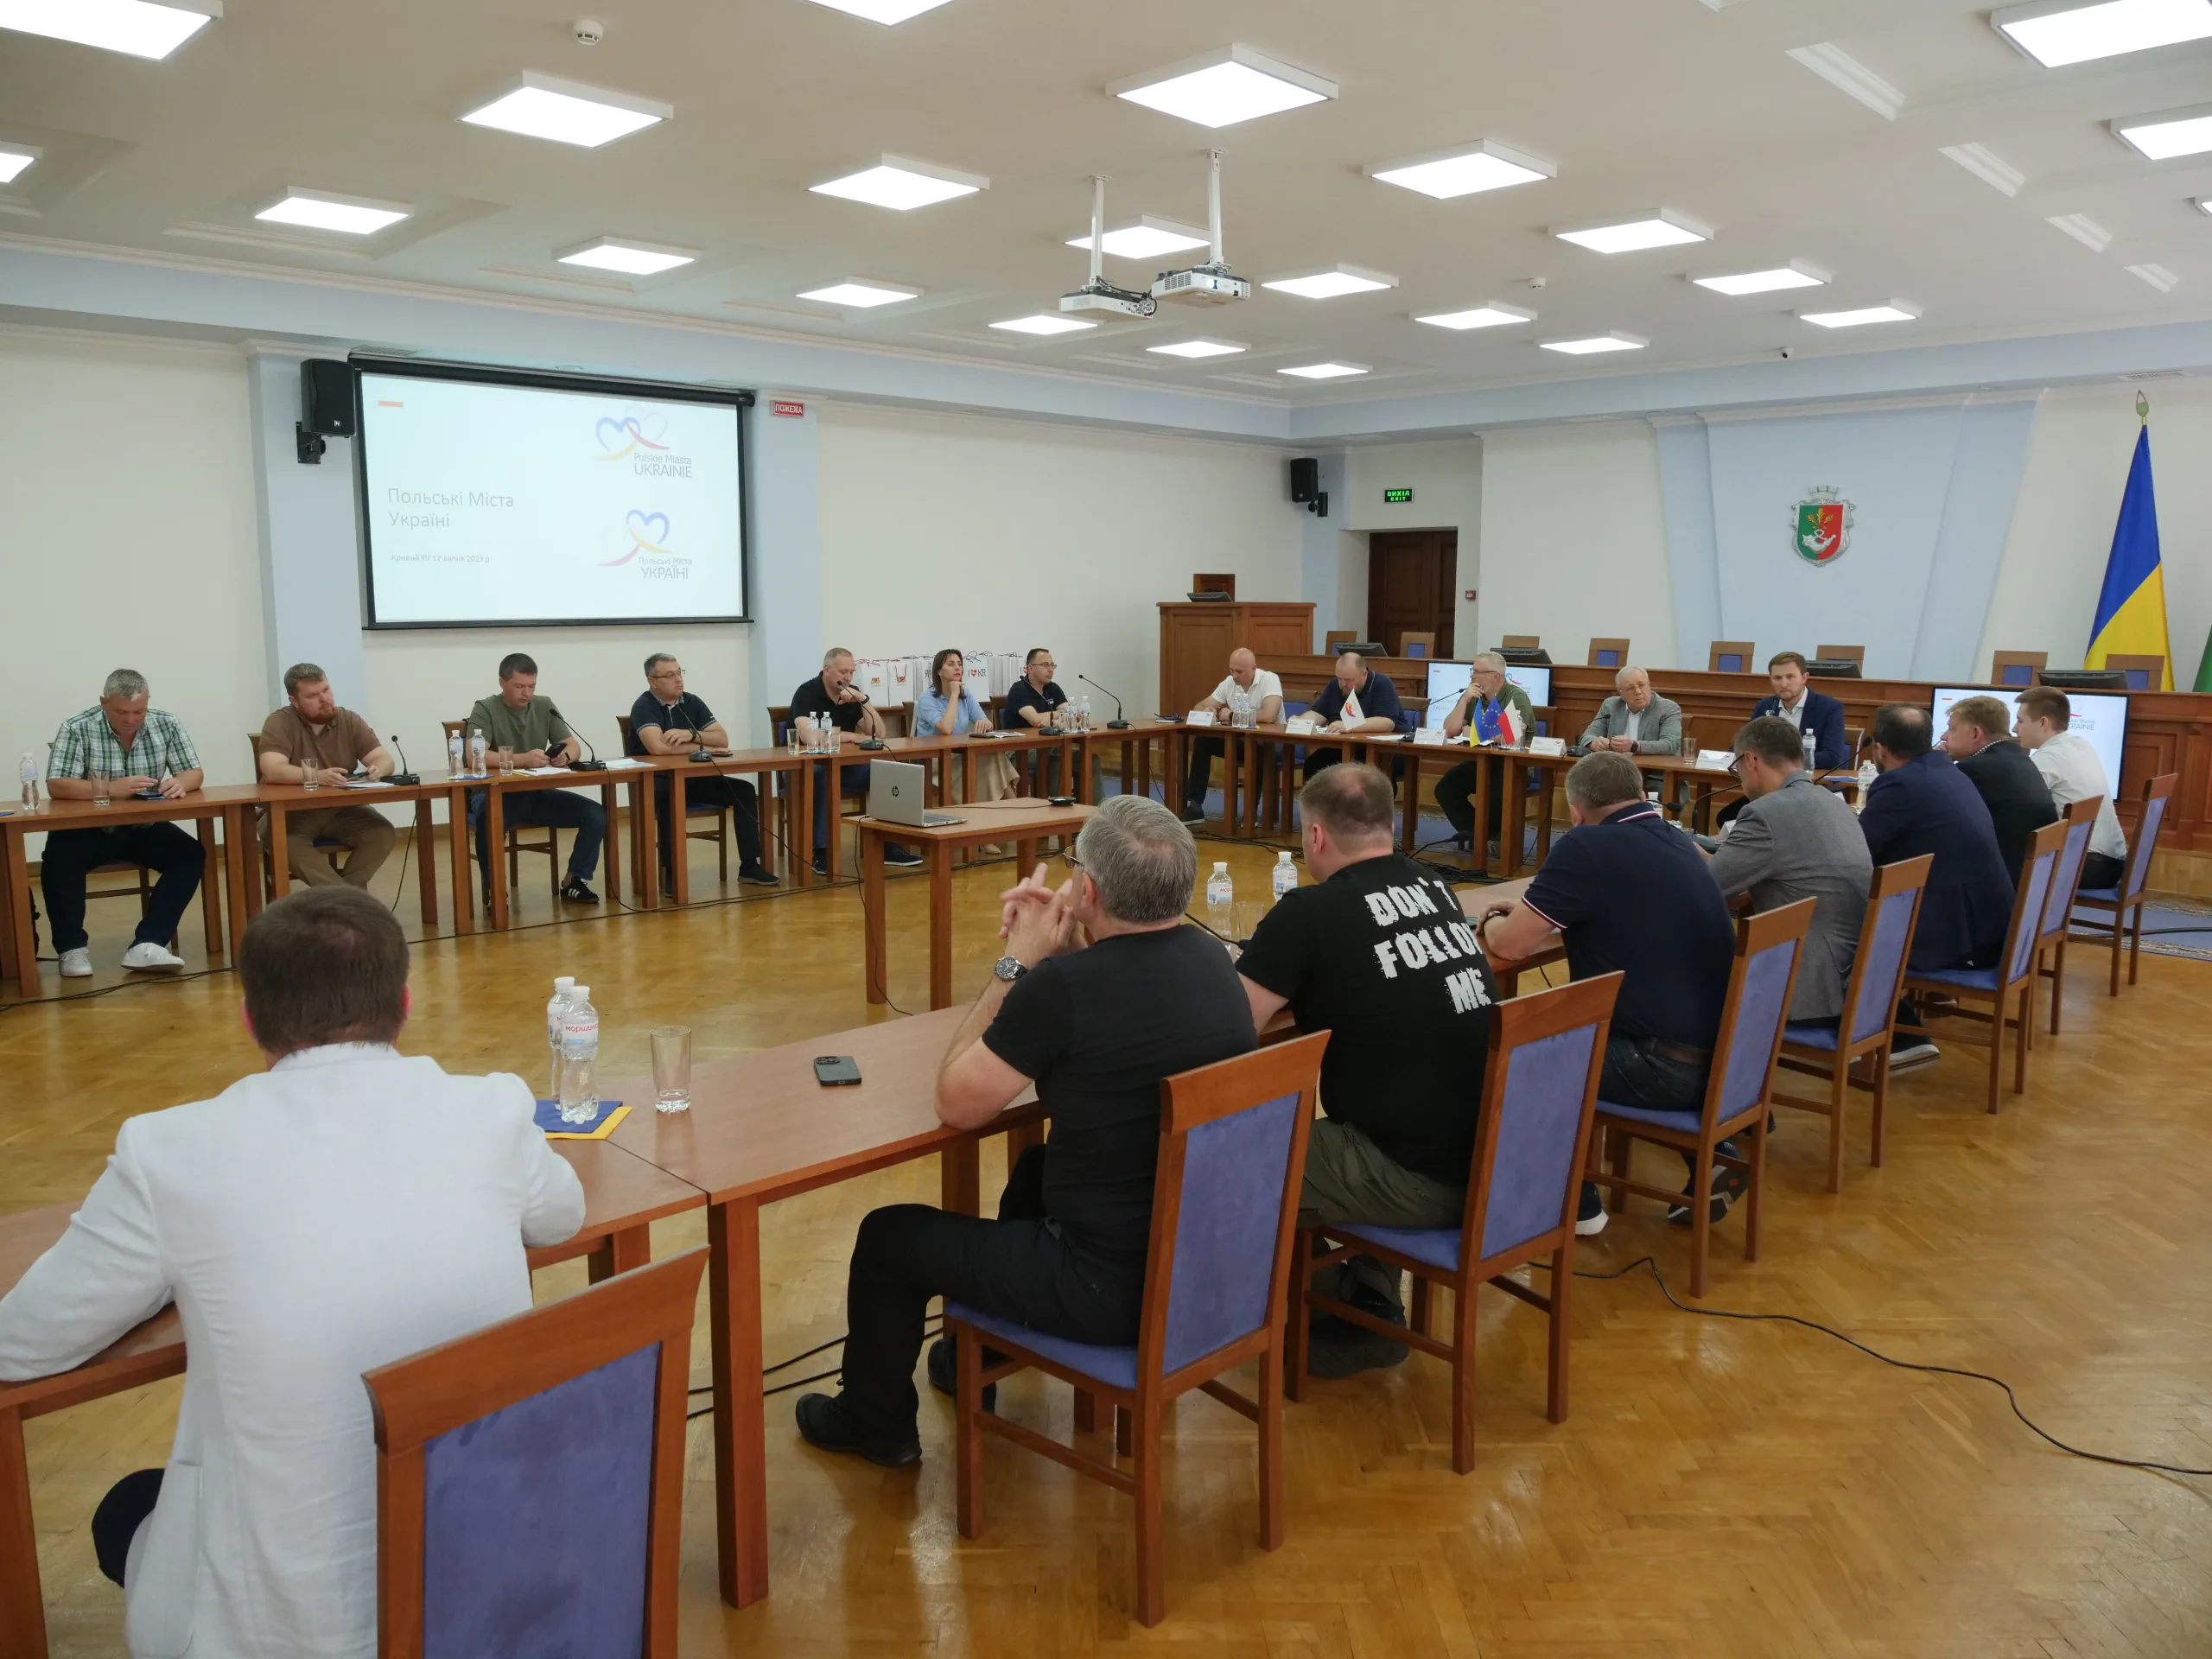 The Forum of Polish and Ukrainian Cities takes place in Kryvyi Rih